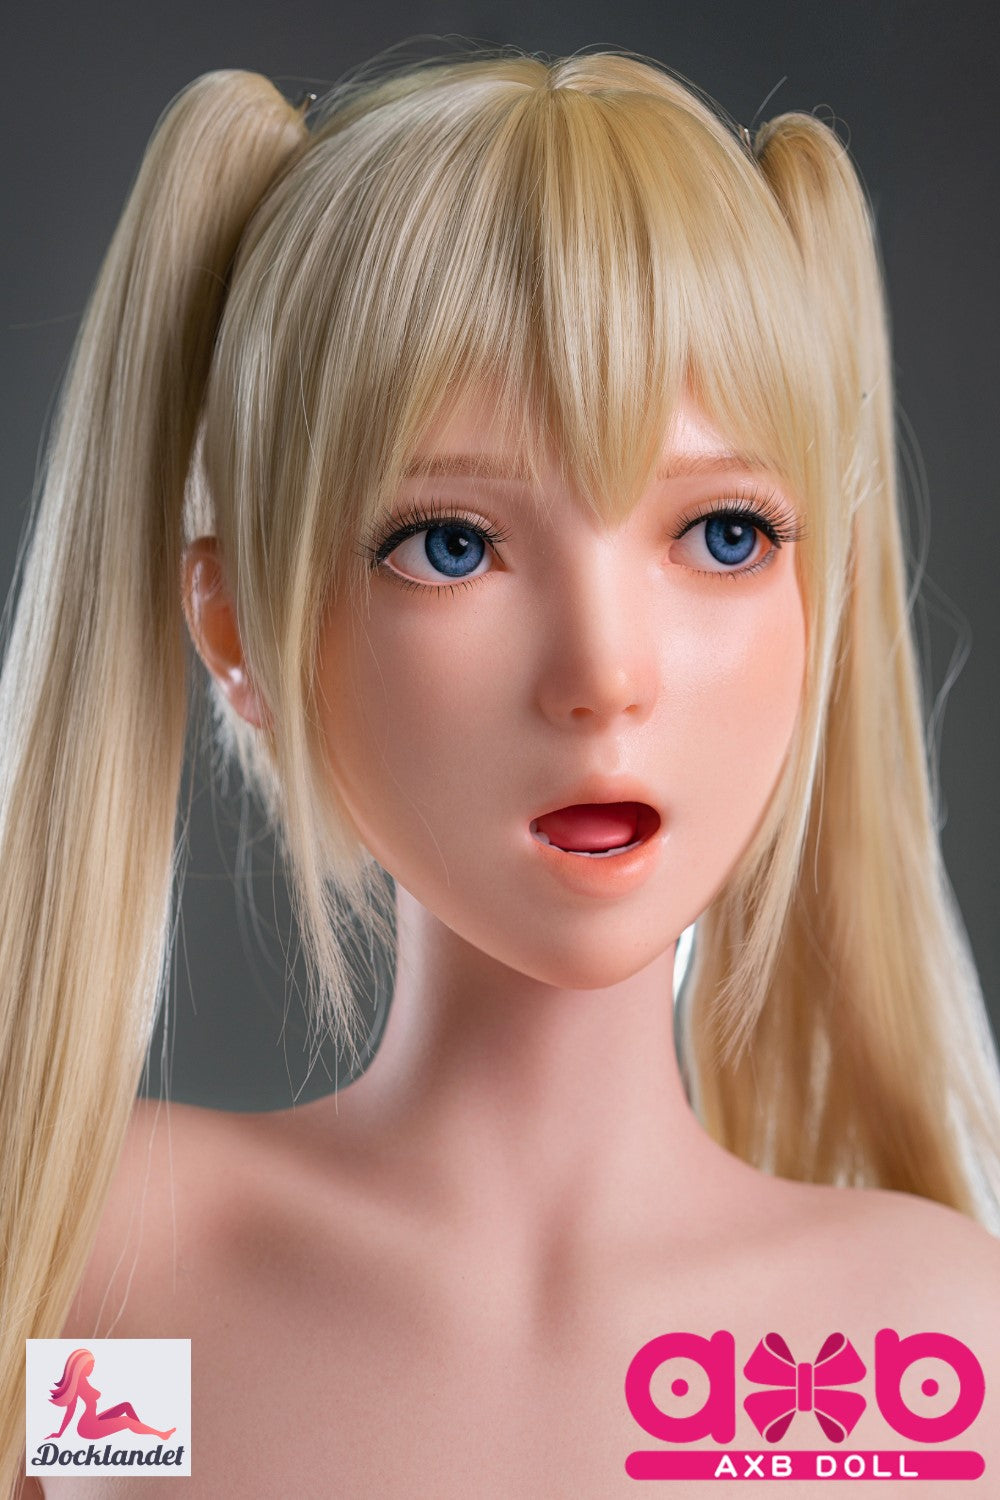 Marie Rose sex doll (Zex 147cm b-cup GD36 silicone)